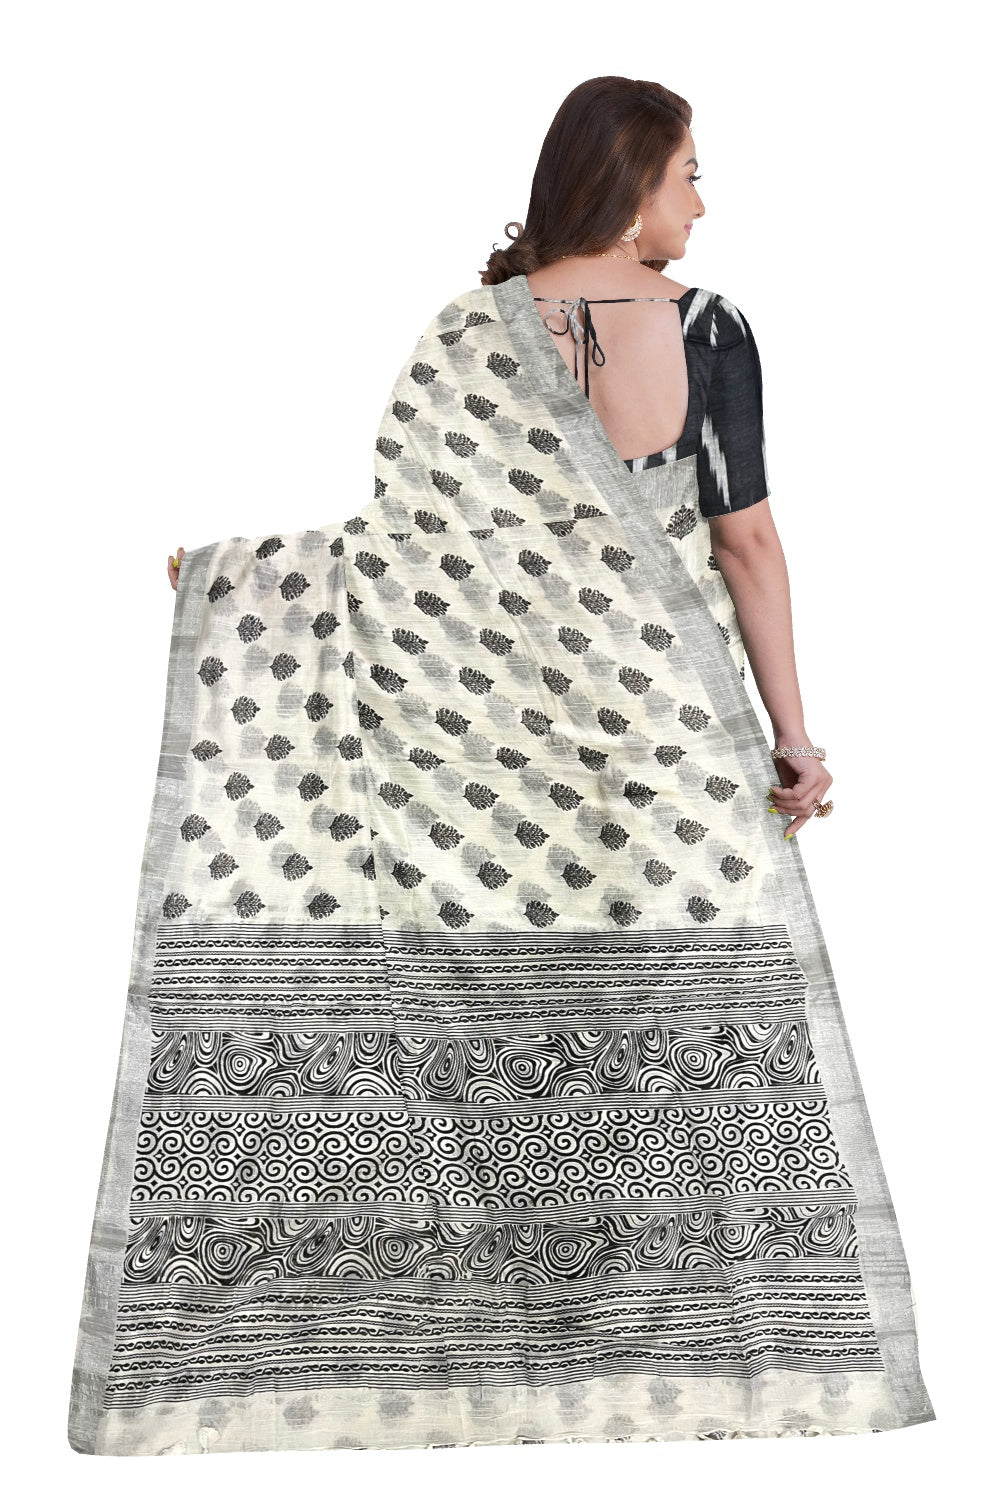 Southloom Linen Designer Saree with Black Prints on White Body and Ikat Printed Blouse Piece